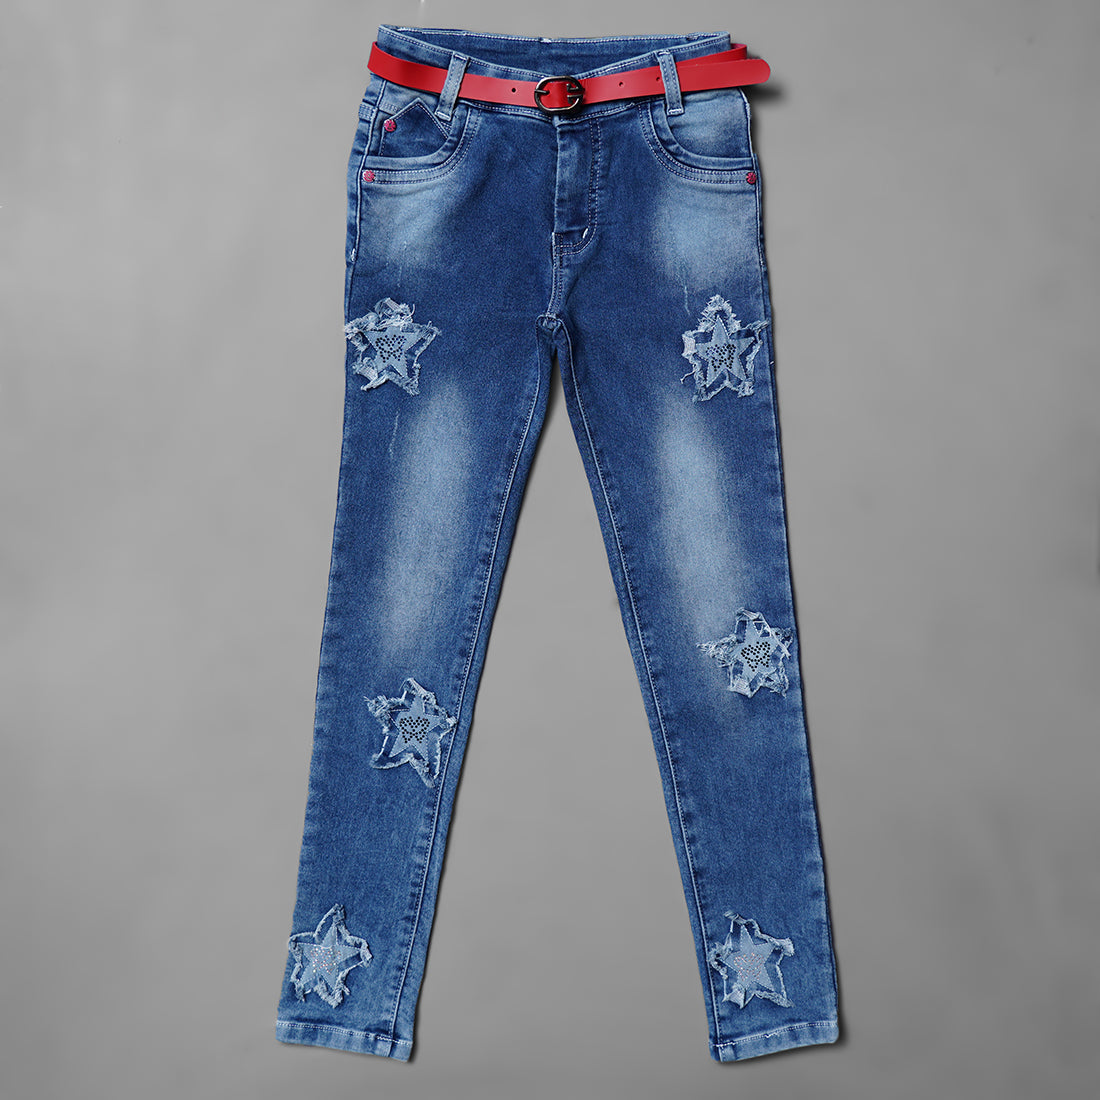 Ladies Skinny Jeans In Bellary - Prices, Manufacturers & Suppliers